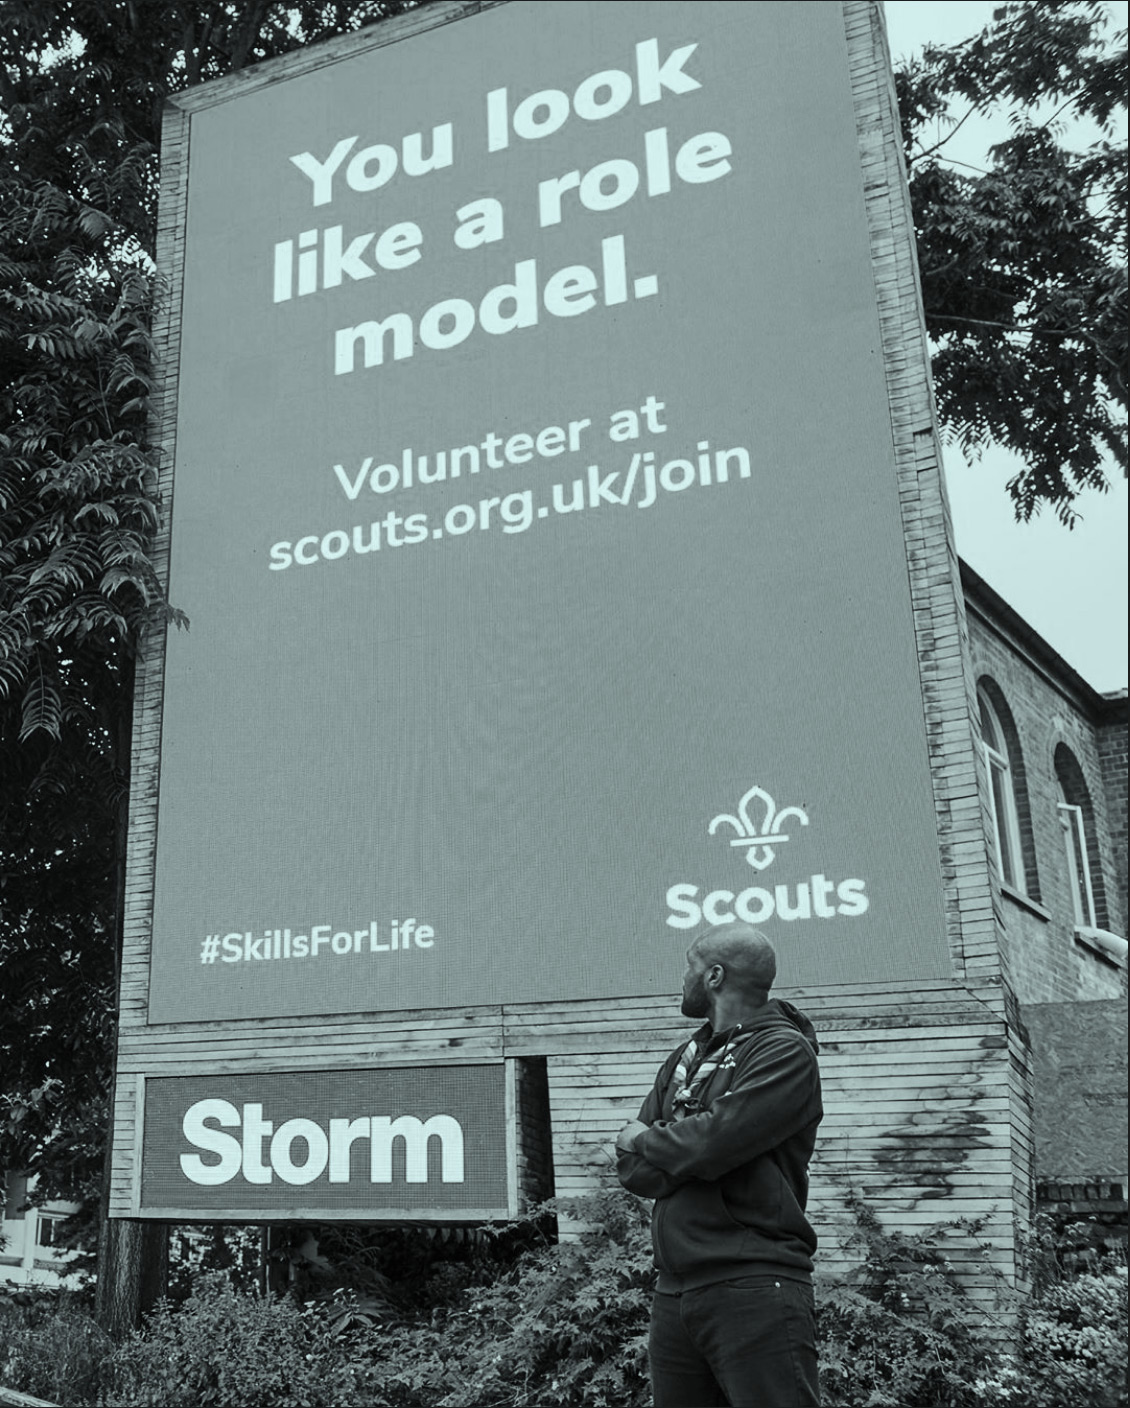 Scouts tone of voice: you look like a role model